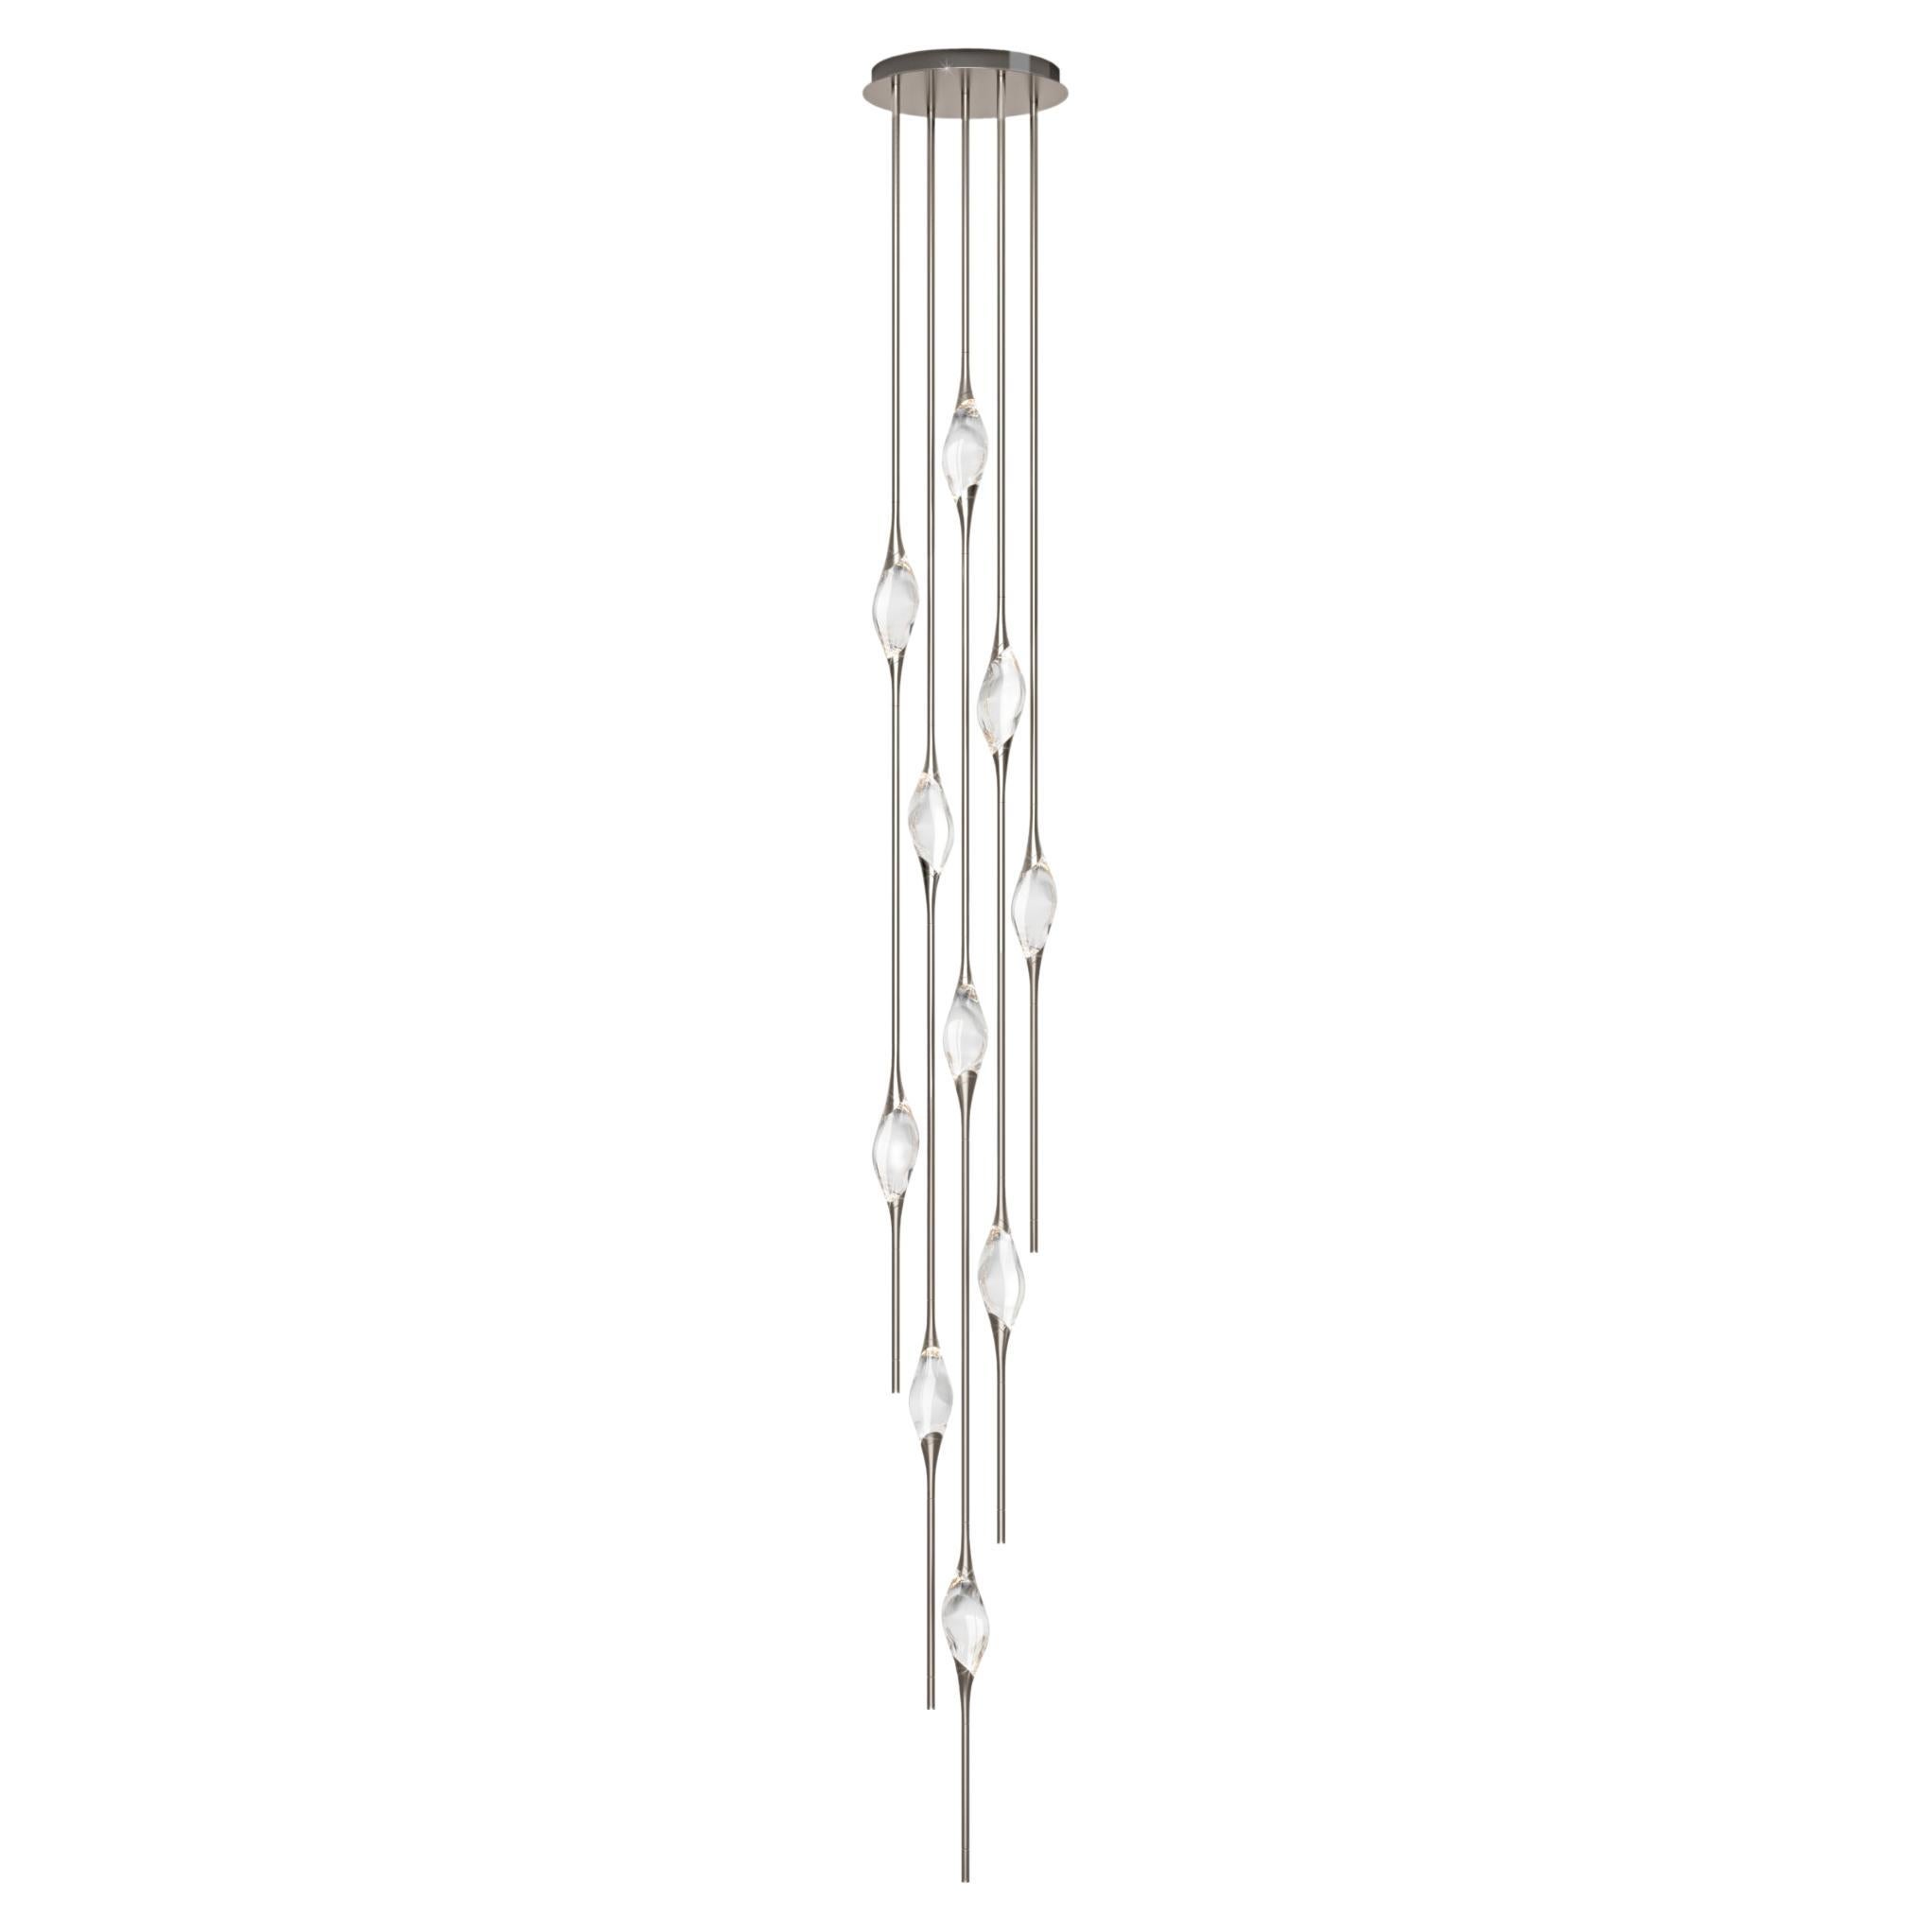 "Il Pezzo 12 Cluster Chandelier" - height 350cm/137" - nickel - crystal - LEDs